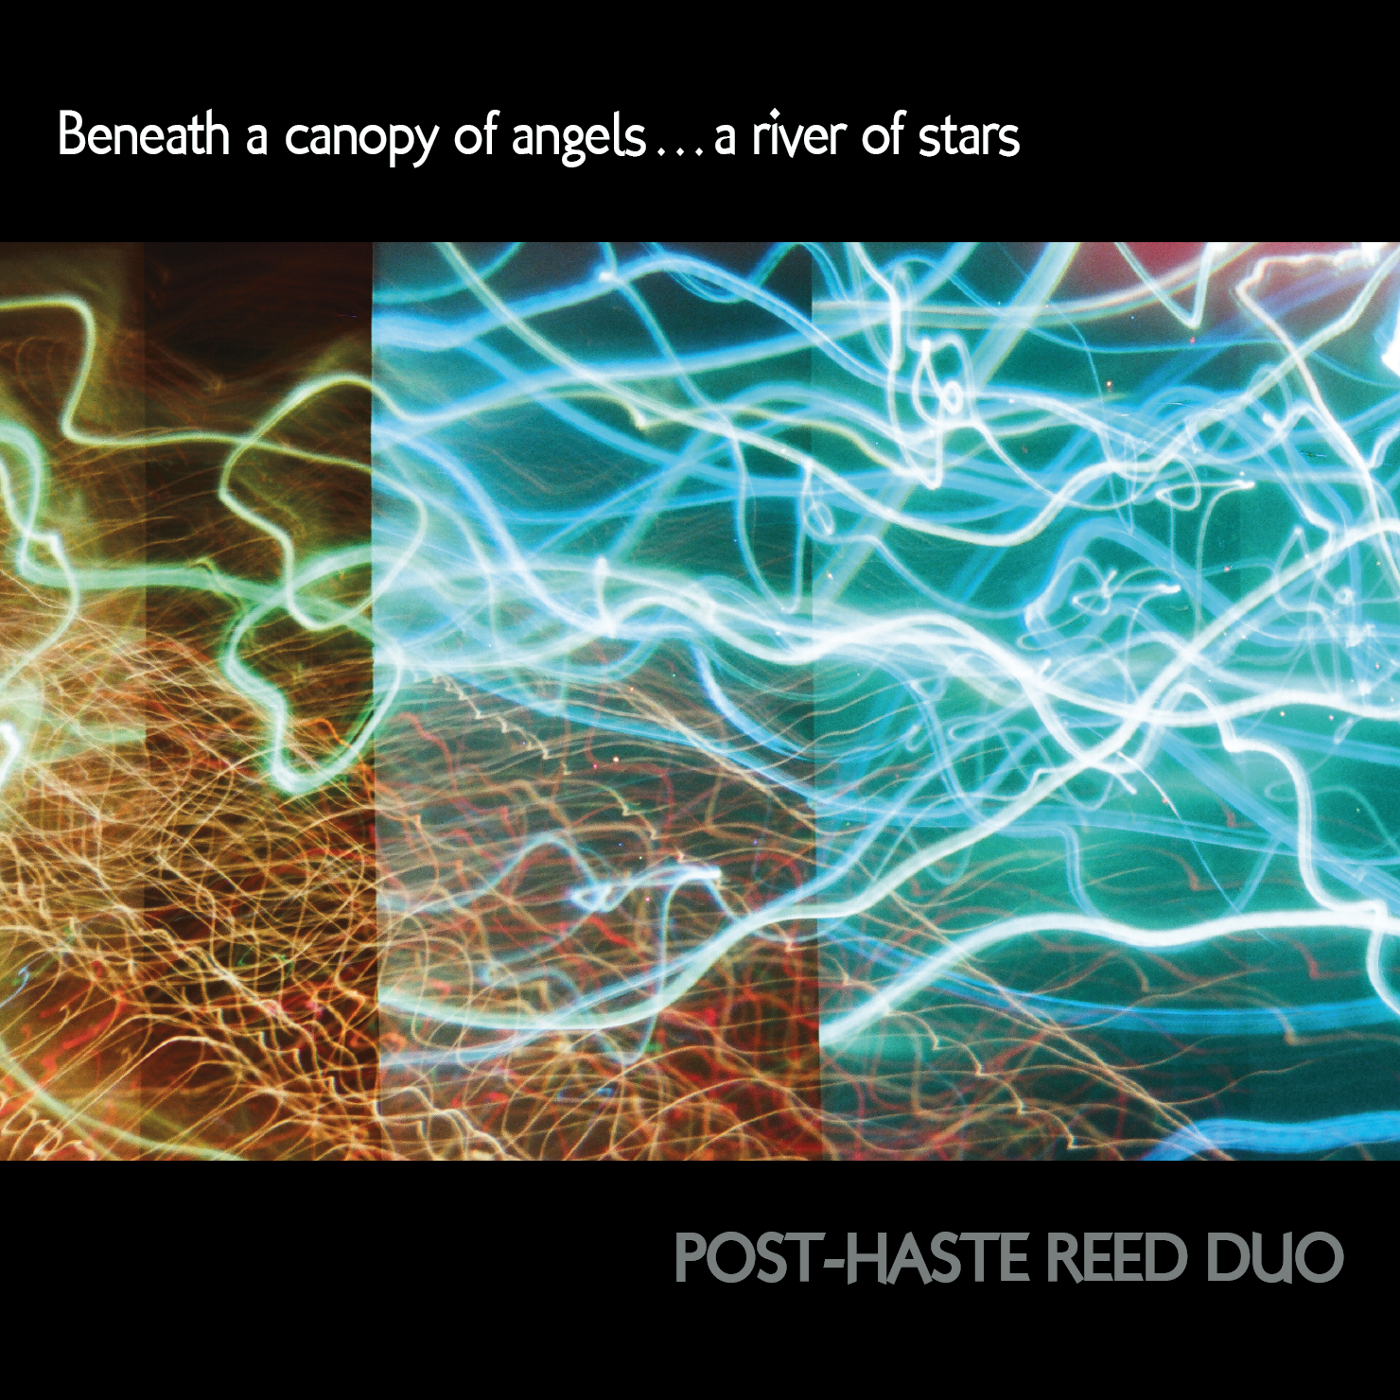 Beneath a canopy of angels...a river of stars by Post-Haste Reed Duo